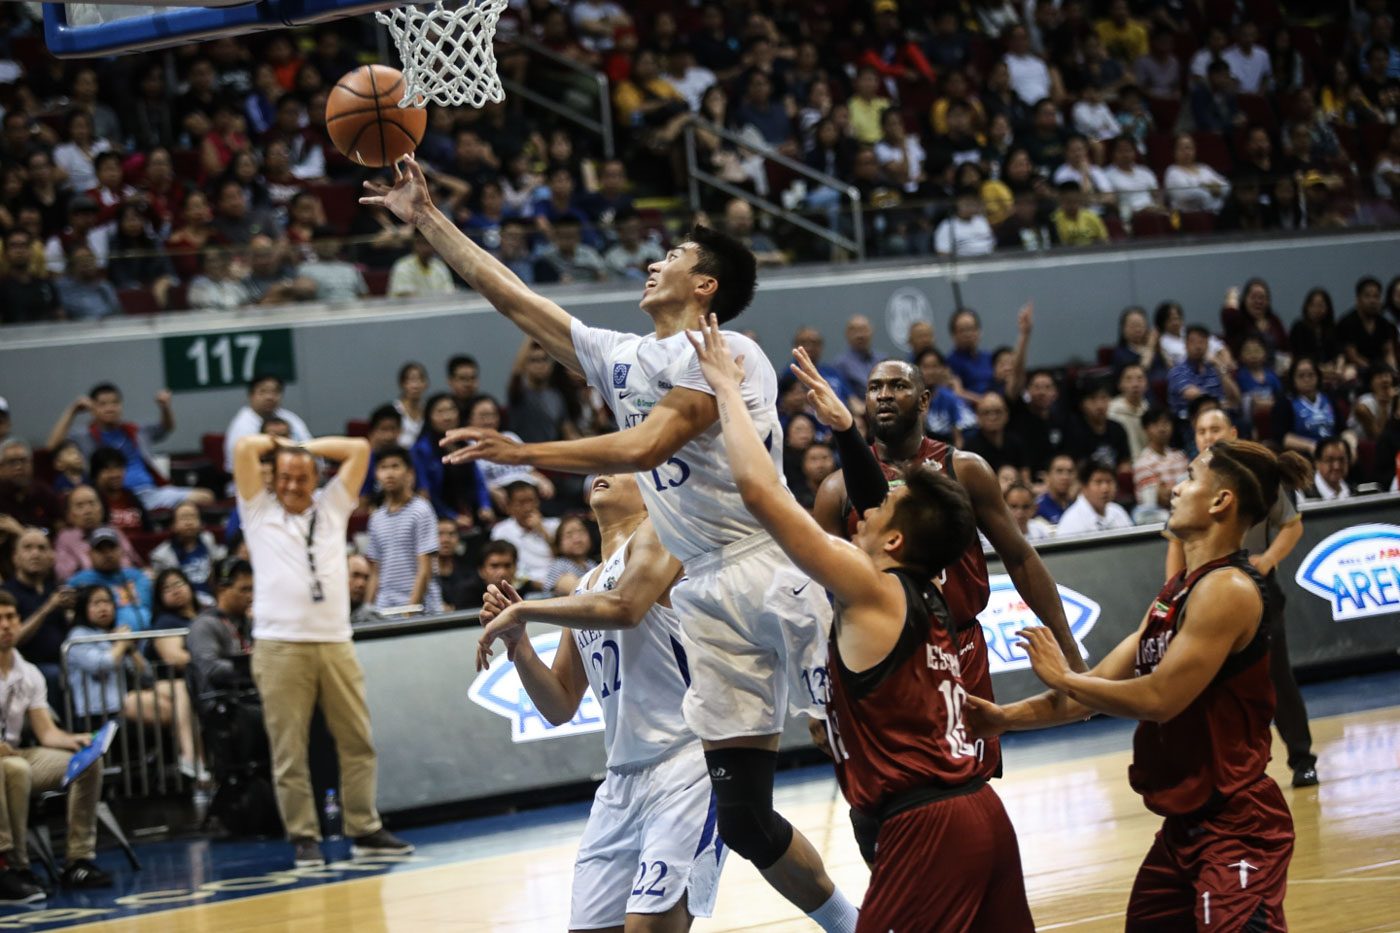 Ateneo hopes to match wildly excited U.P. crowd